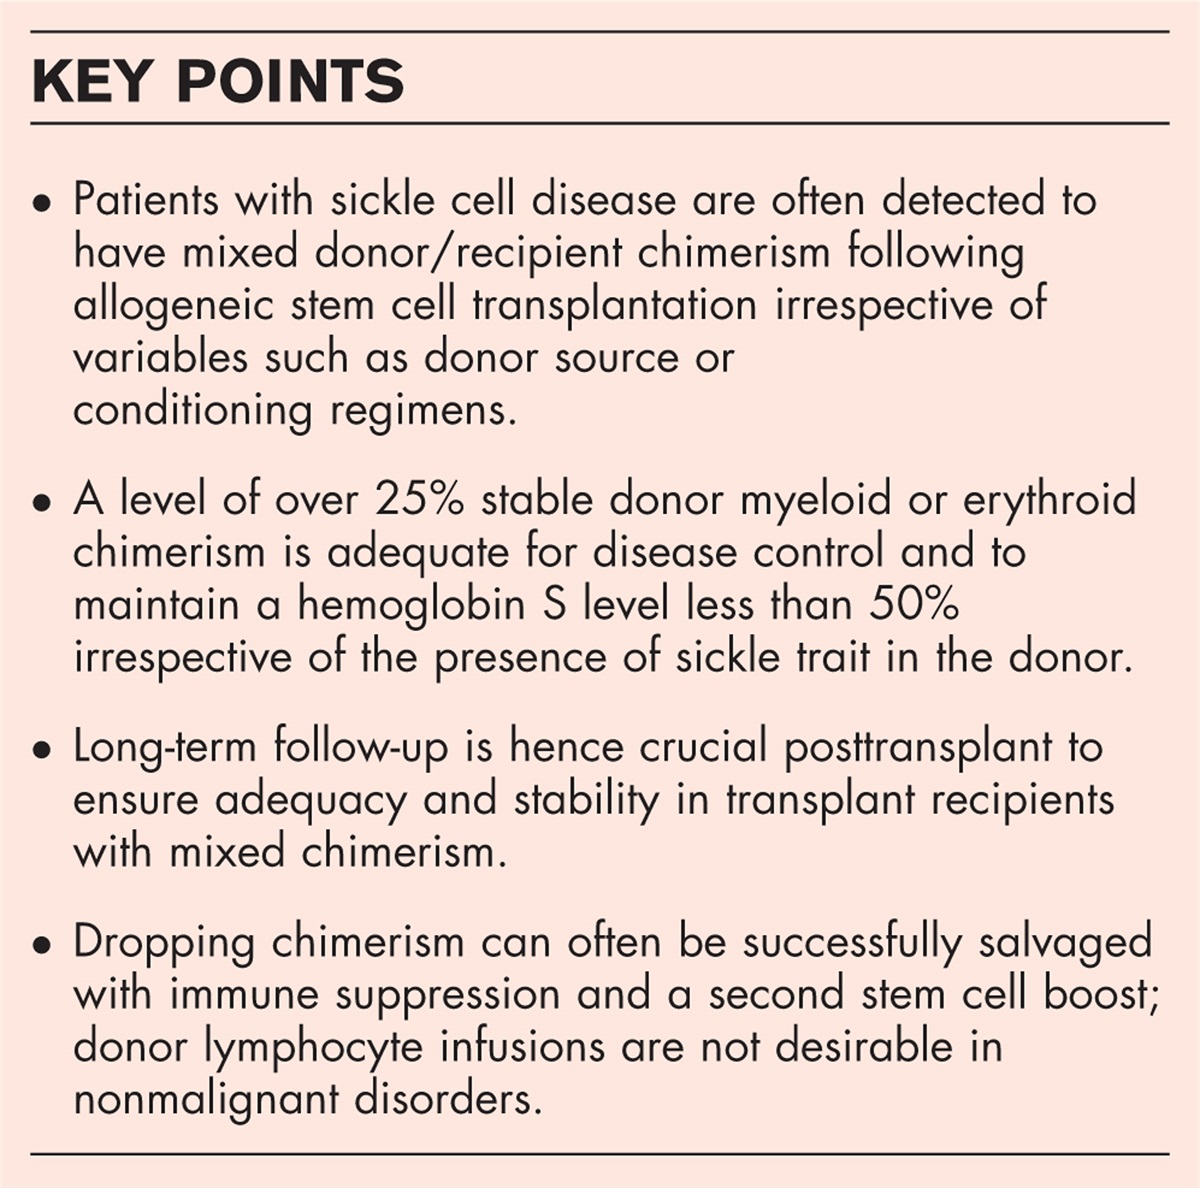 Mixed donor chimerism following stem cell transplantation for sickle cell disease